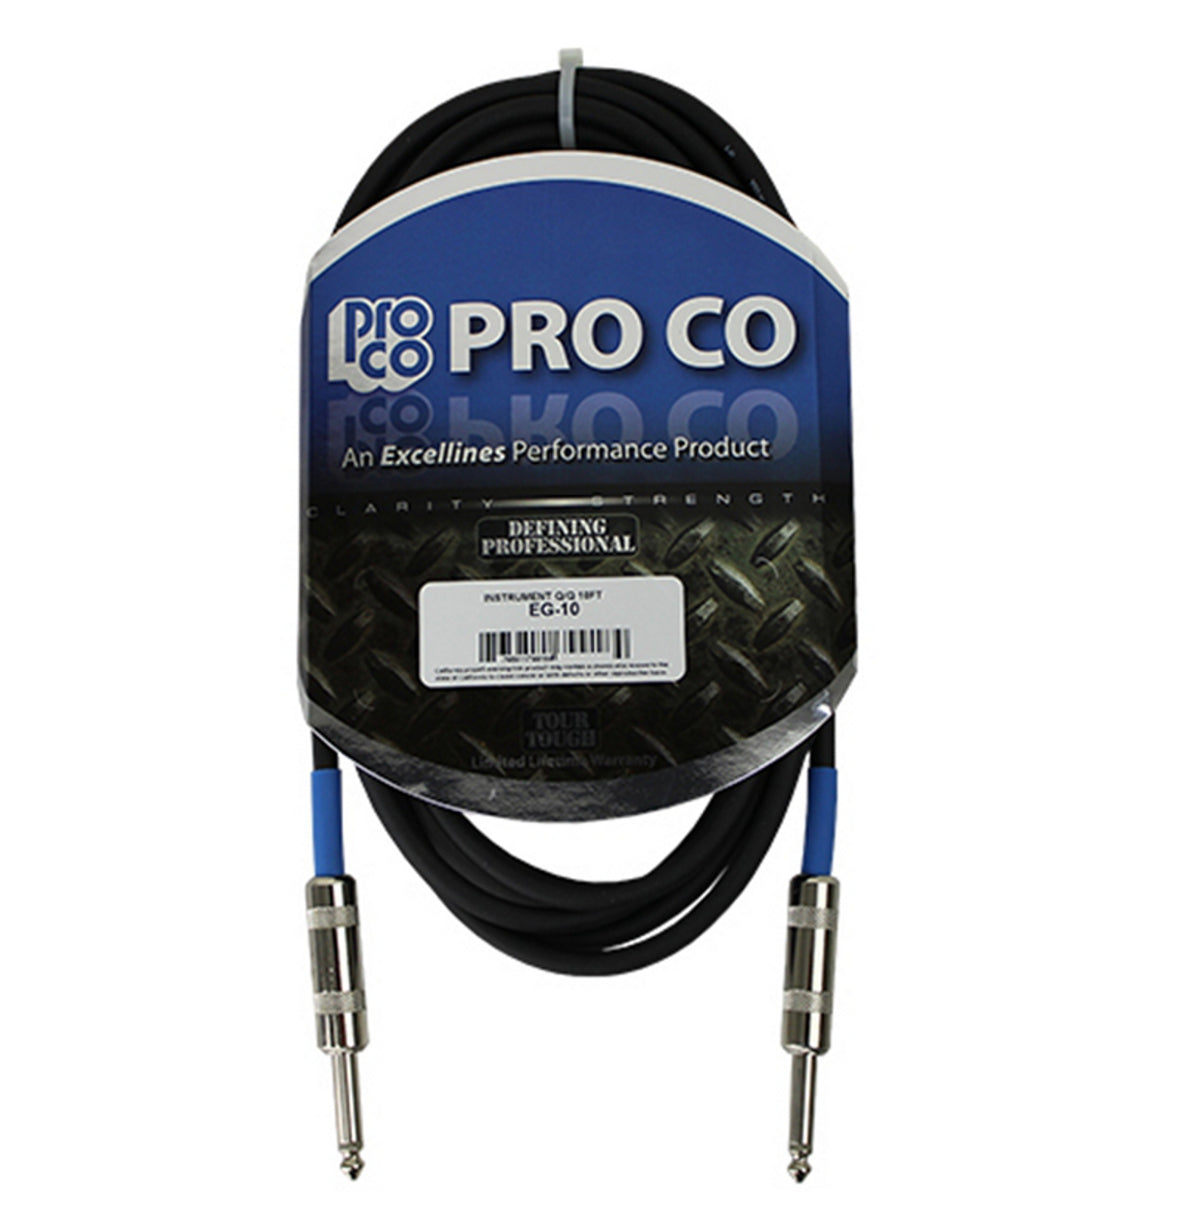 Pro Co EG-10 10' Excellines 1/4" Instrument Cable